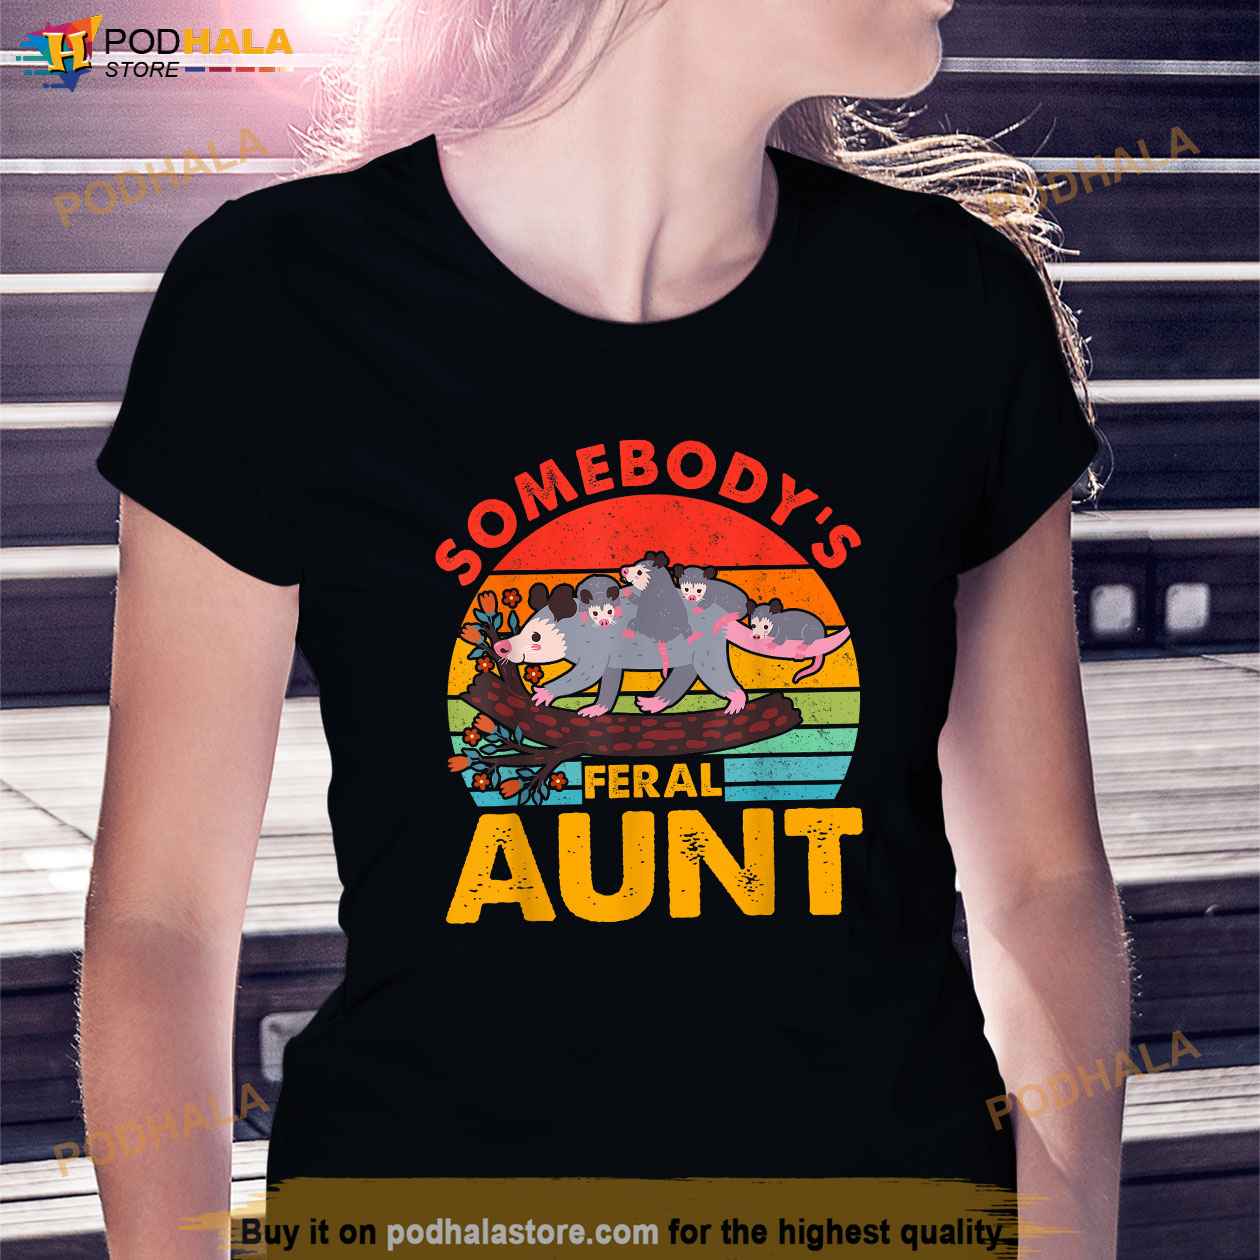 Somebody's Feral Aunt Shirt, Cool Design Unisex T Shirt Tee Tops